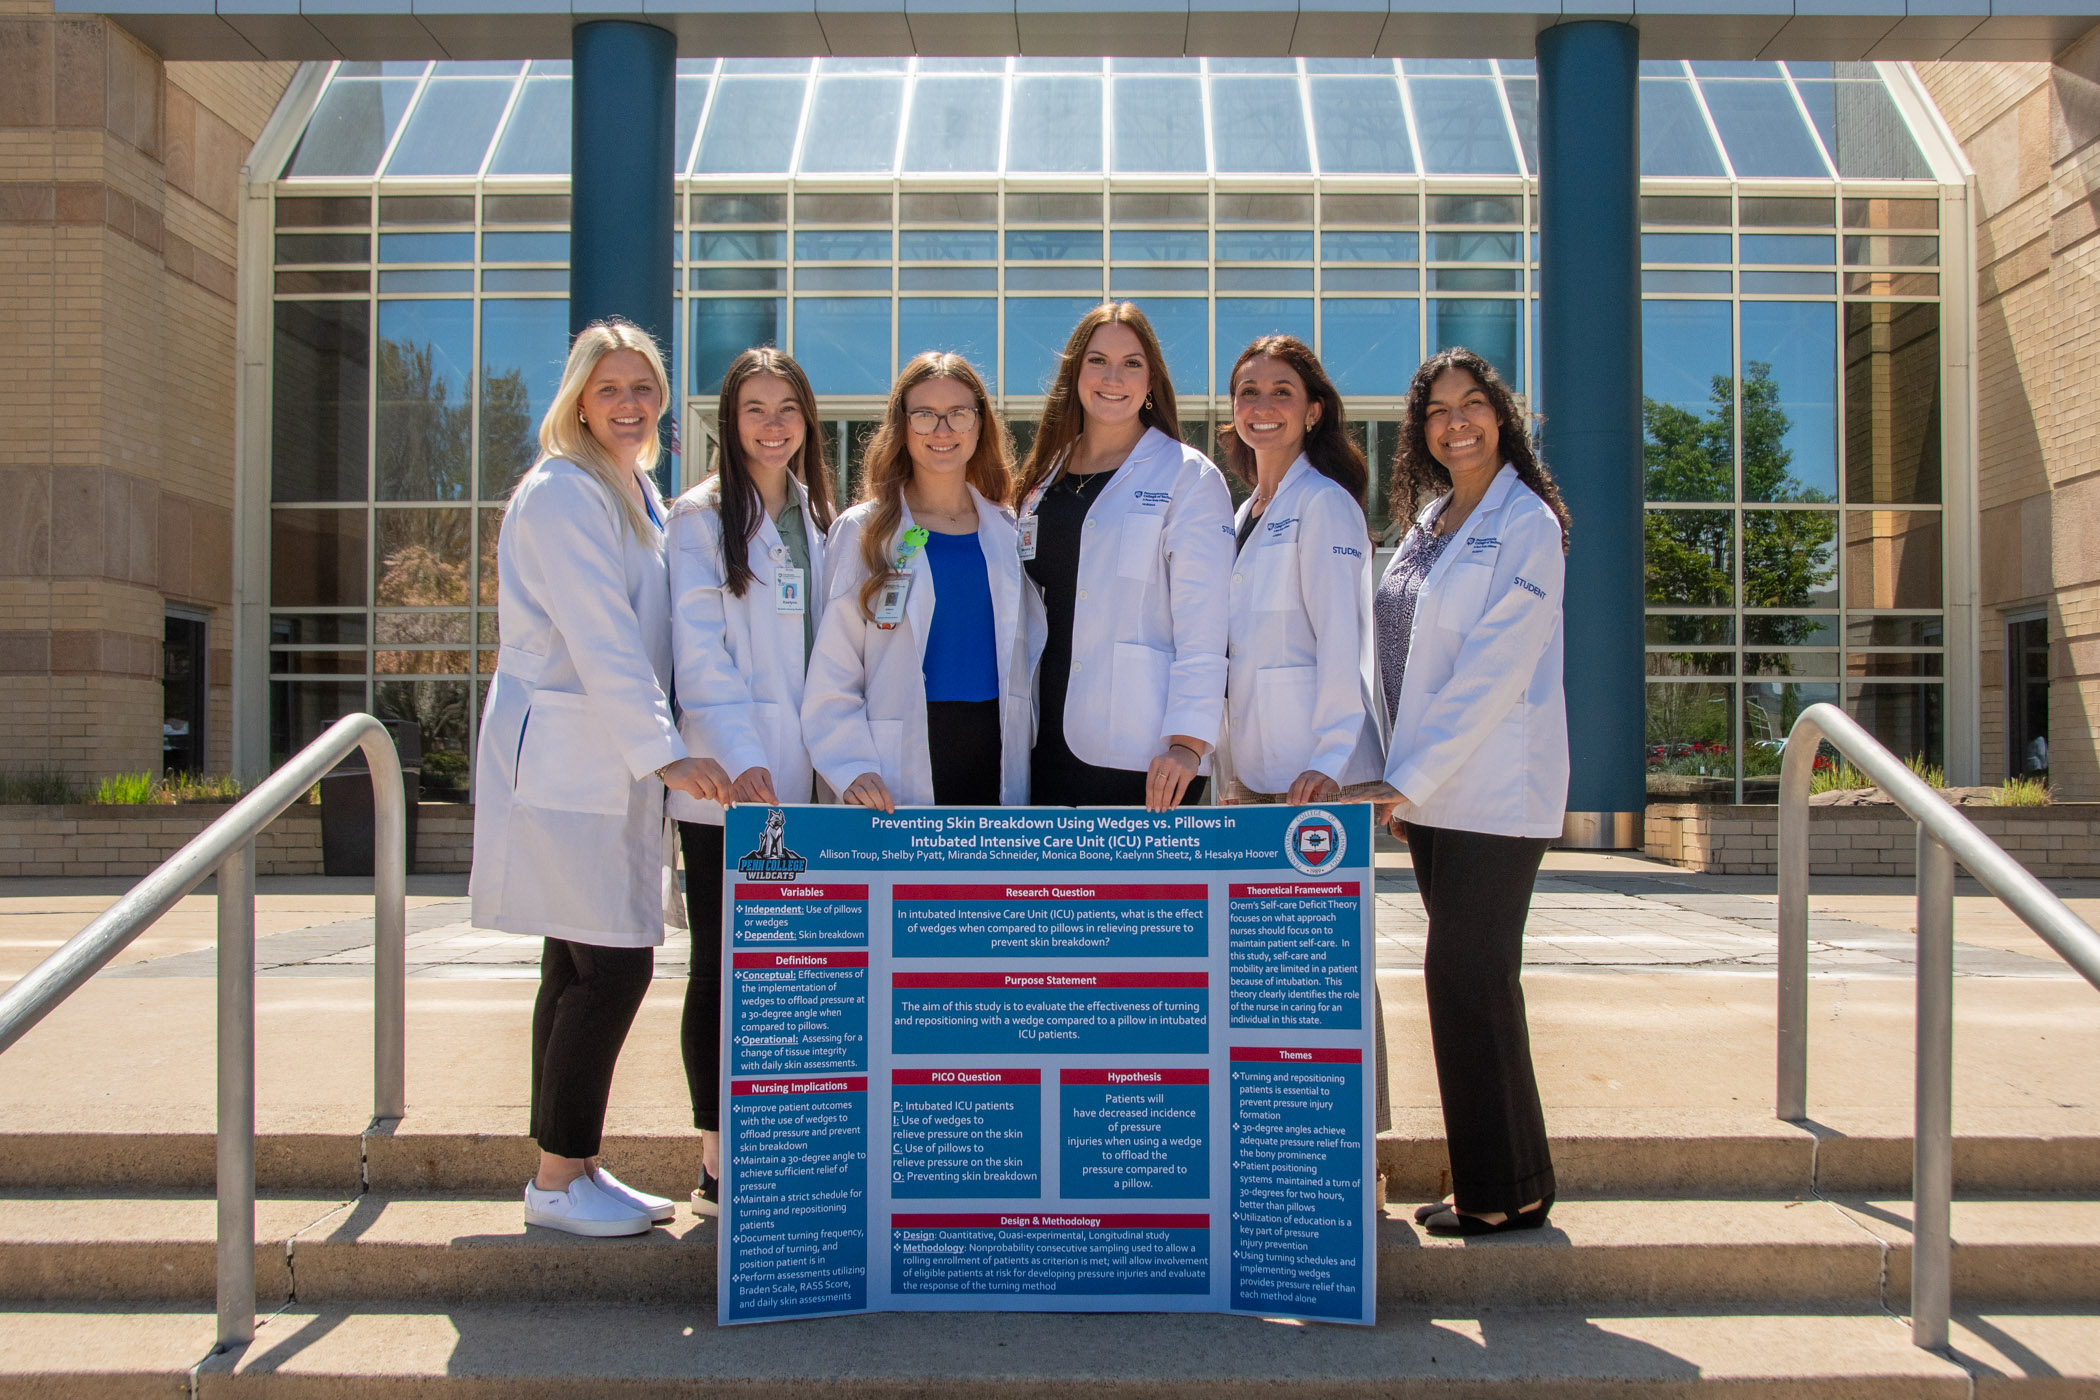 Nursing students' capstones present clinical research